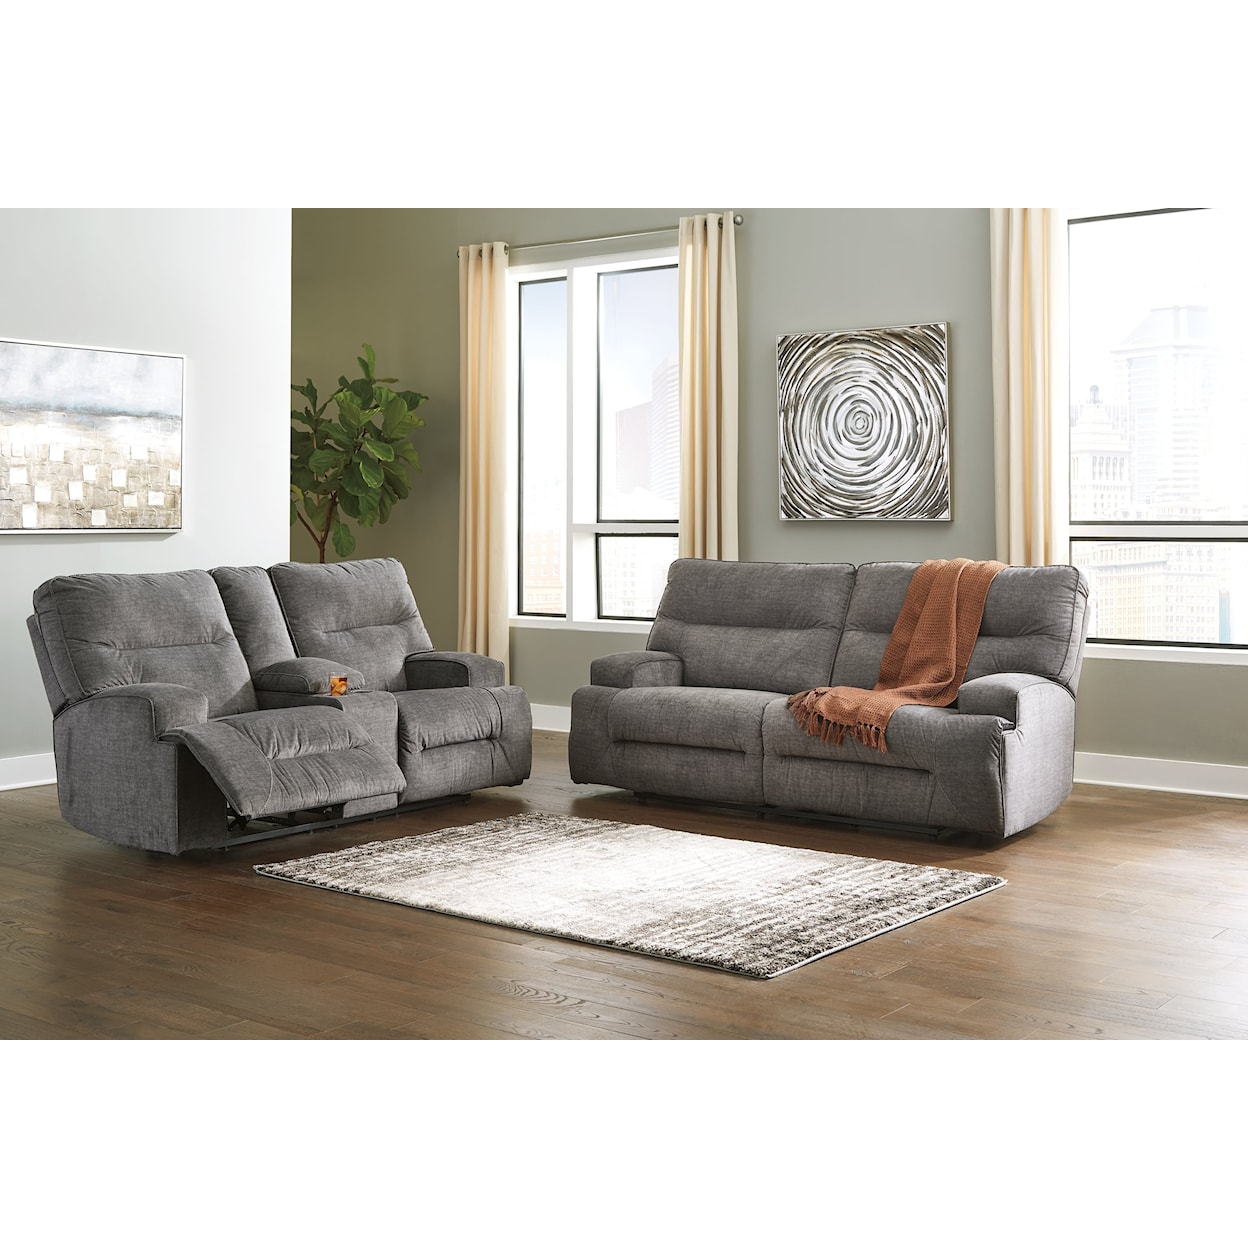 Signature Design by Ashley Coombs Reclining Sofa and Loveseat Set